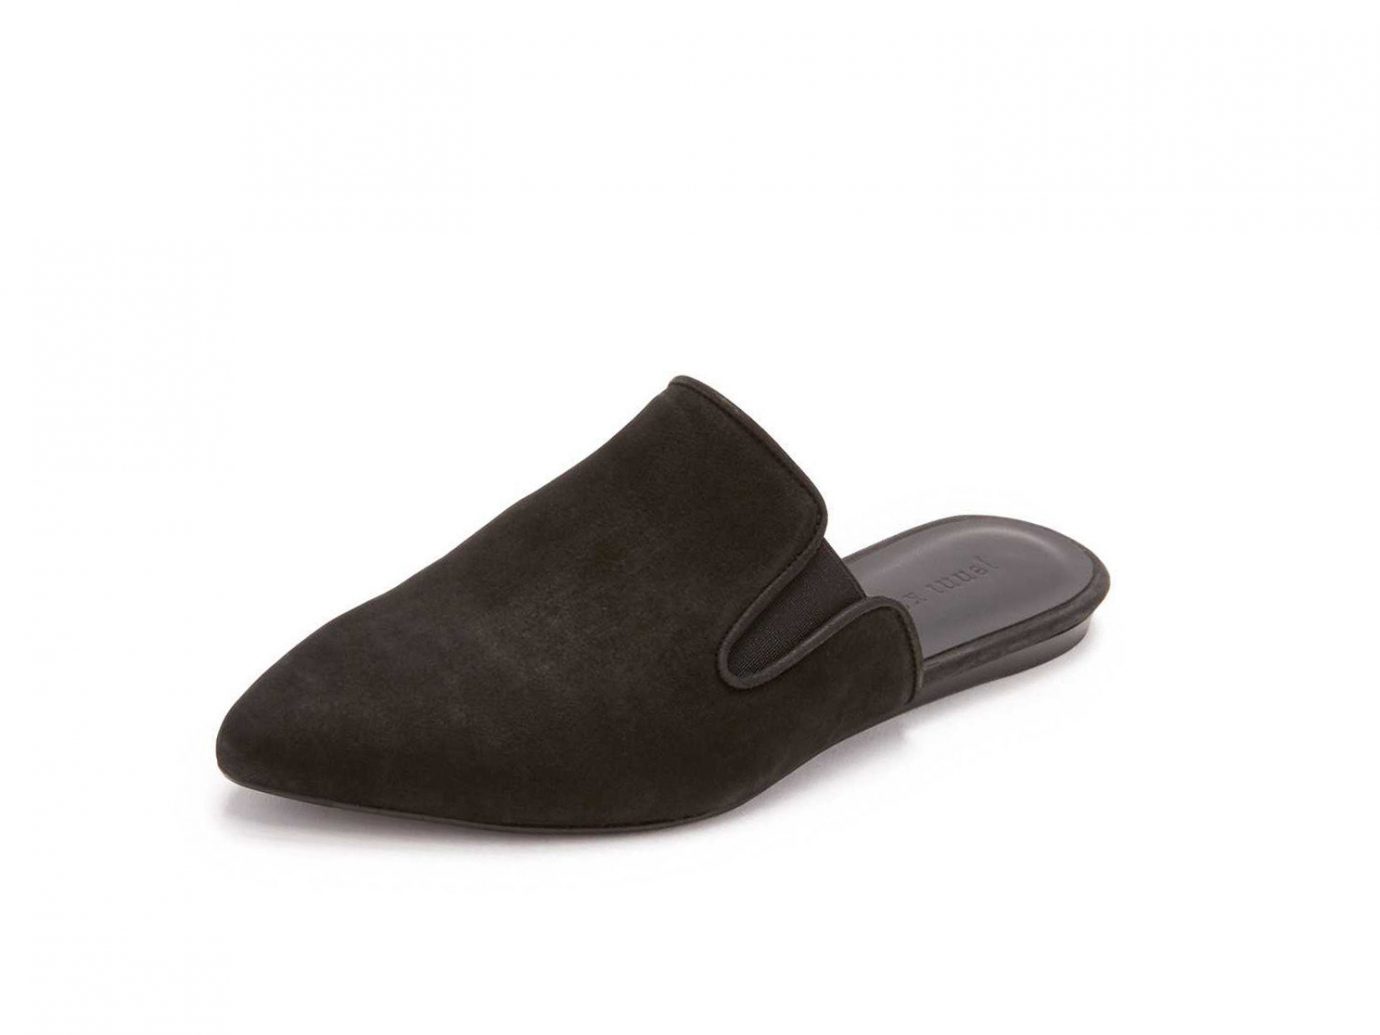 Style + Design clothing footwear shoe leather black slipper suede textile outdoor shoe material